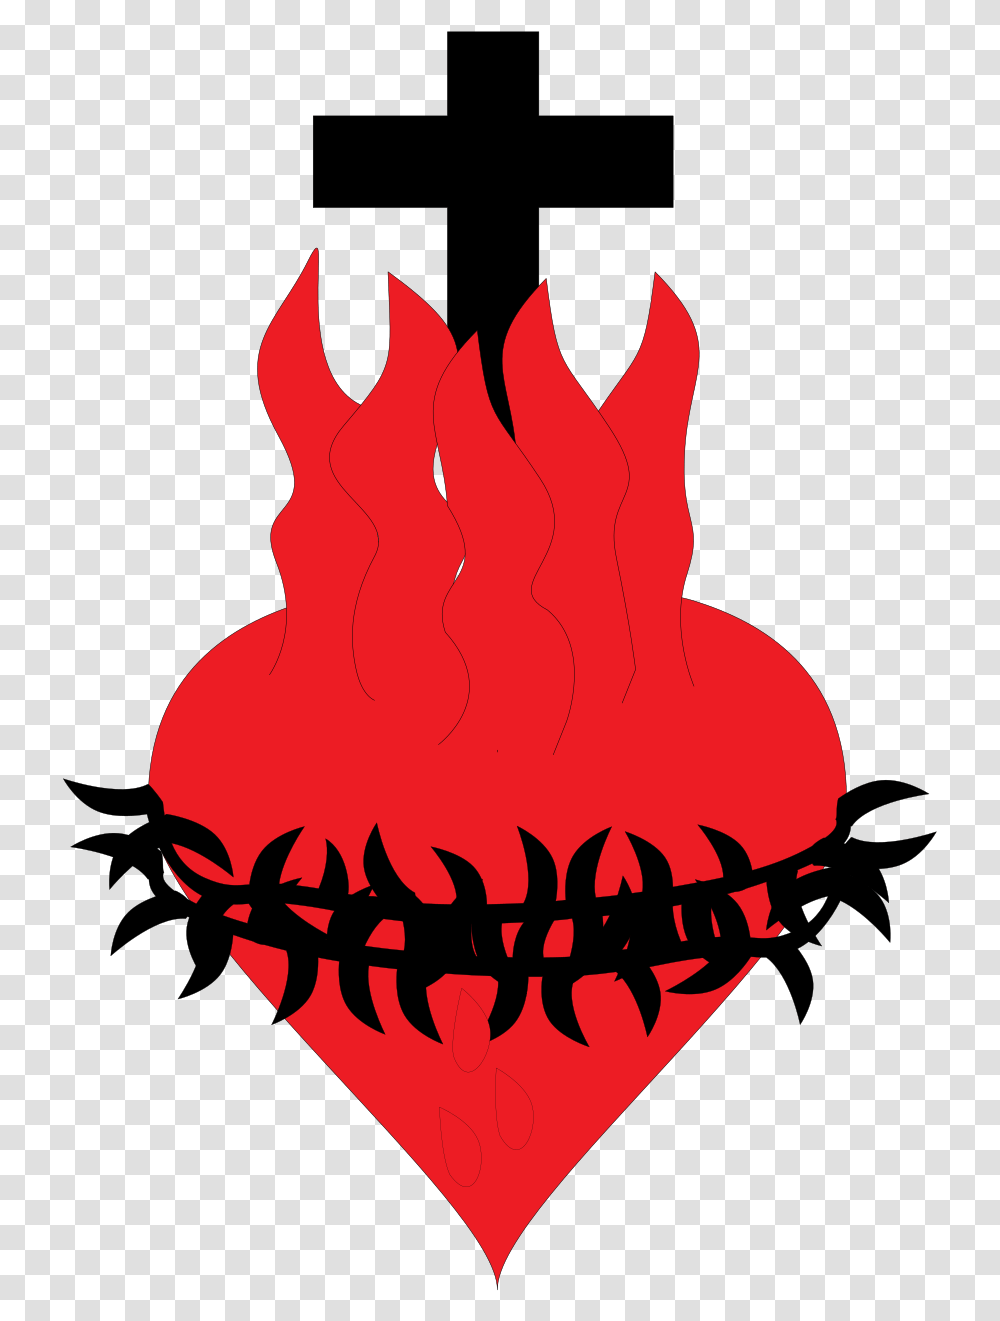 Coeur Croix Heart With Fire And Cross, Flame, Poster, Advertisement, Hand Transparent Png